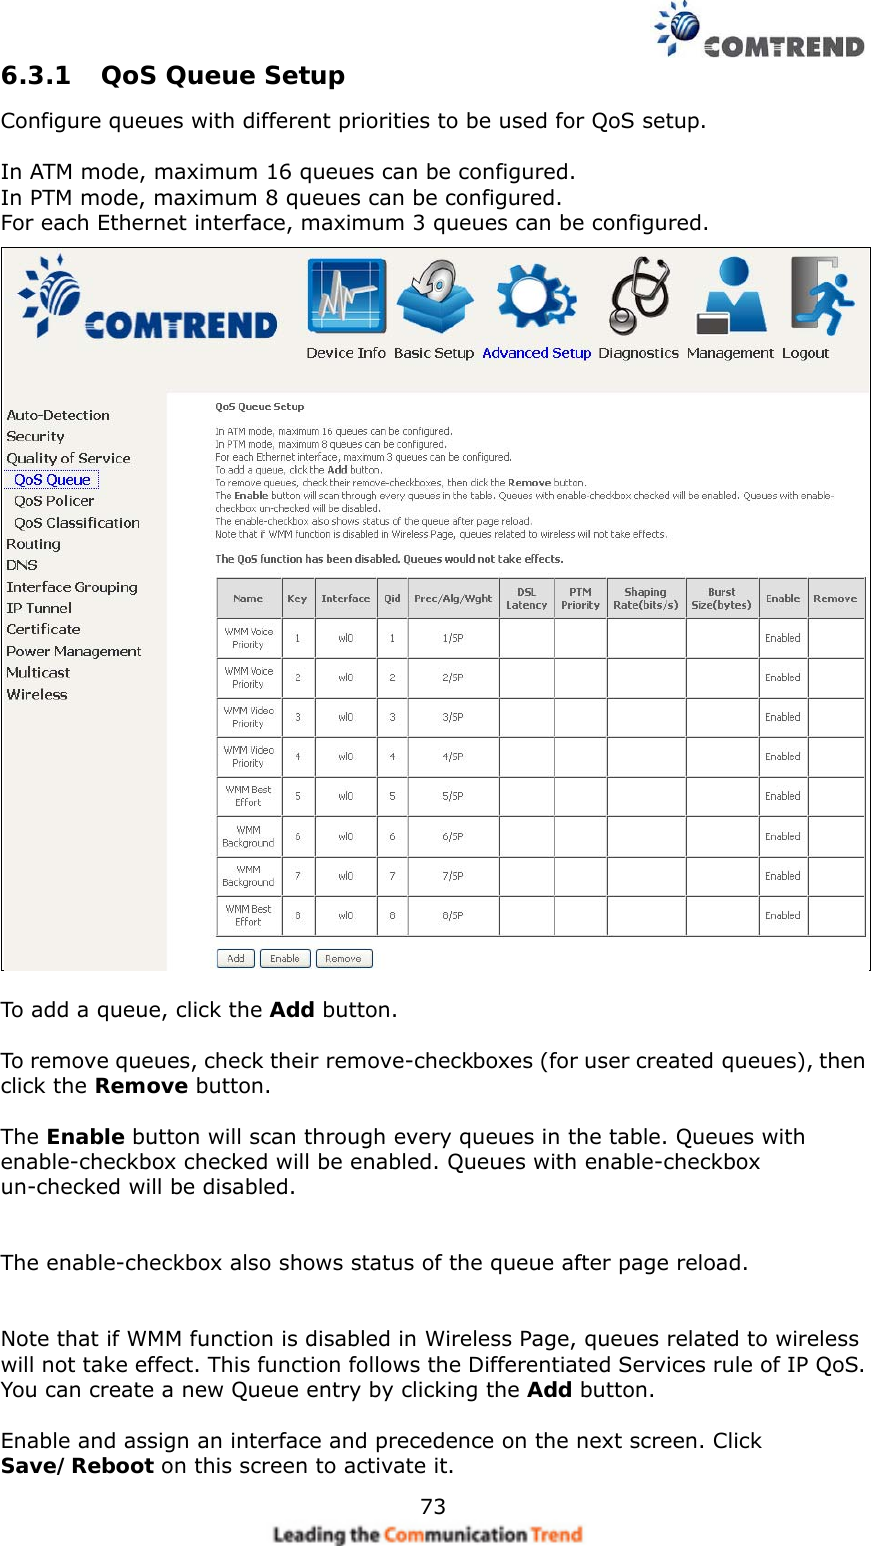    736.3.1  QoS Queue Setup Configure queues with different priorities to be used for QoS setup.  In ATM mode, maximum 16 queues can be configured. In PTM mode, maximum 8 queues can be configured. For each Ethernet interface, maximum 3 queues can be configured.   To add a queue, click the Add button.  To remove queues, check their remove-checkboxes (for user created queues), then click the Remove button.  The Enable button will scan through every queues in the table. Queues with enable-checkbox checked will be enabled. Queues with enable-checkbox un-checked will be disabled.   The enable-checkbox also shows status of the queue after page reload.   Note that if WMM function is disabled in Wireless Page, queues related to wireless will not take effect. This function follows the Differentiated Services rule of IP QoS. You can create a new Queue entry by clicking the Add button.    Enable and assign an interface and precedence on the next screen. Click Save/Reboot on this screen to activate it. 